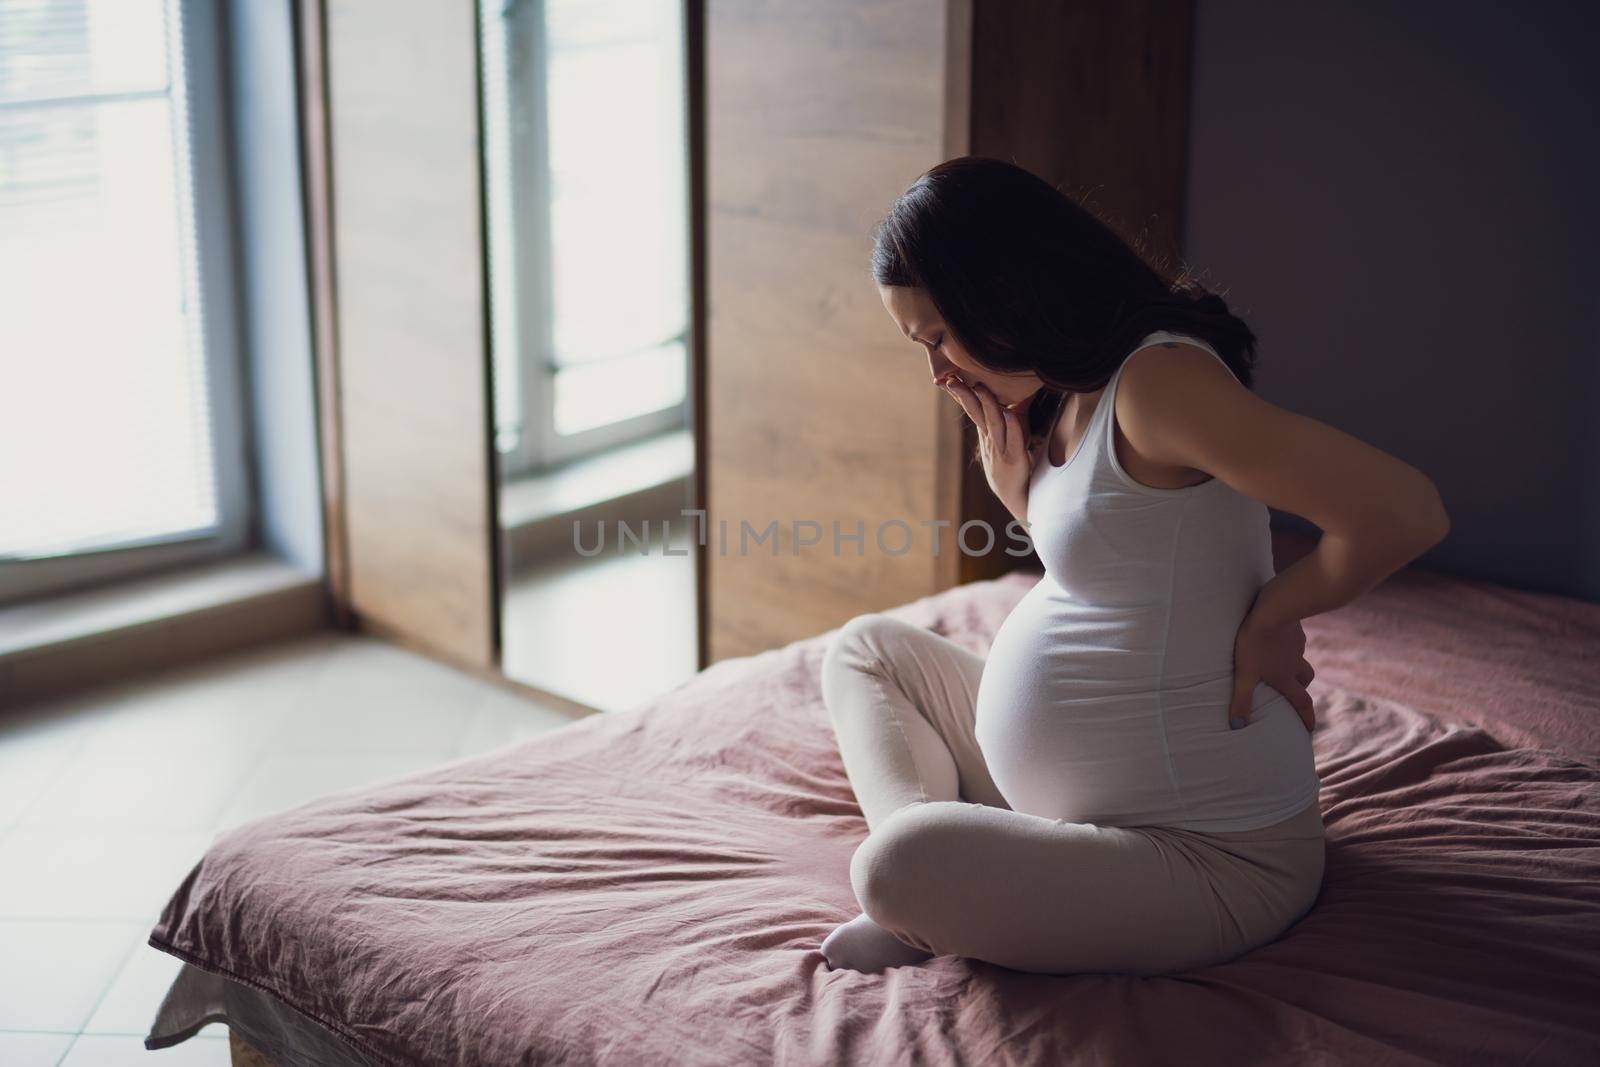 Pregnant woman is having pain in her stomach and back. She is sitting on bed at home.